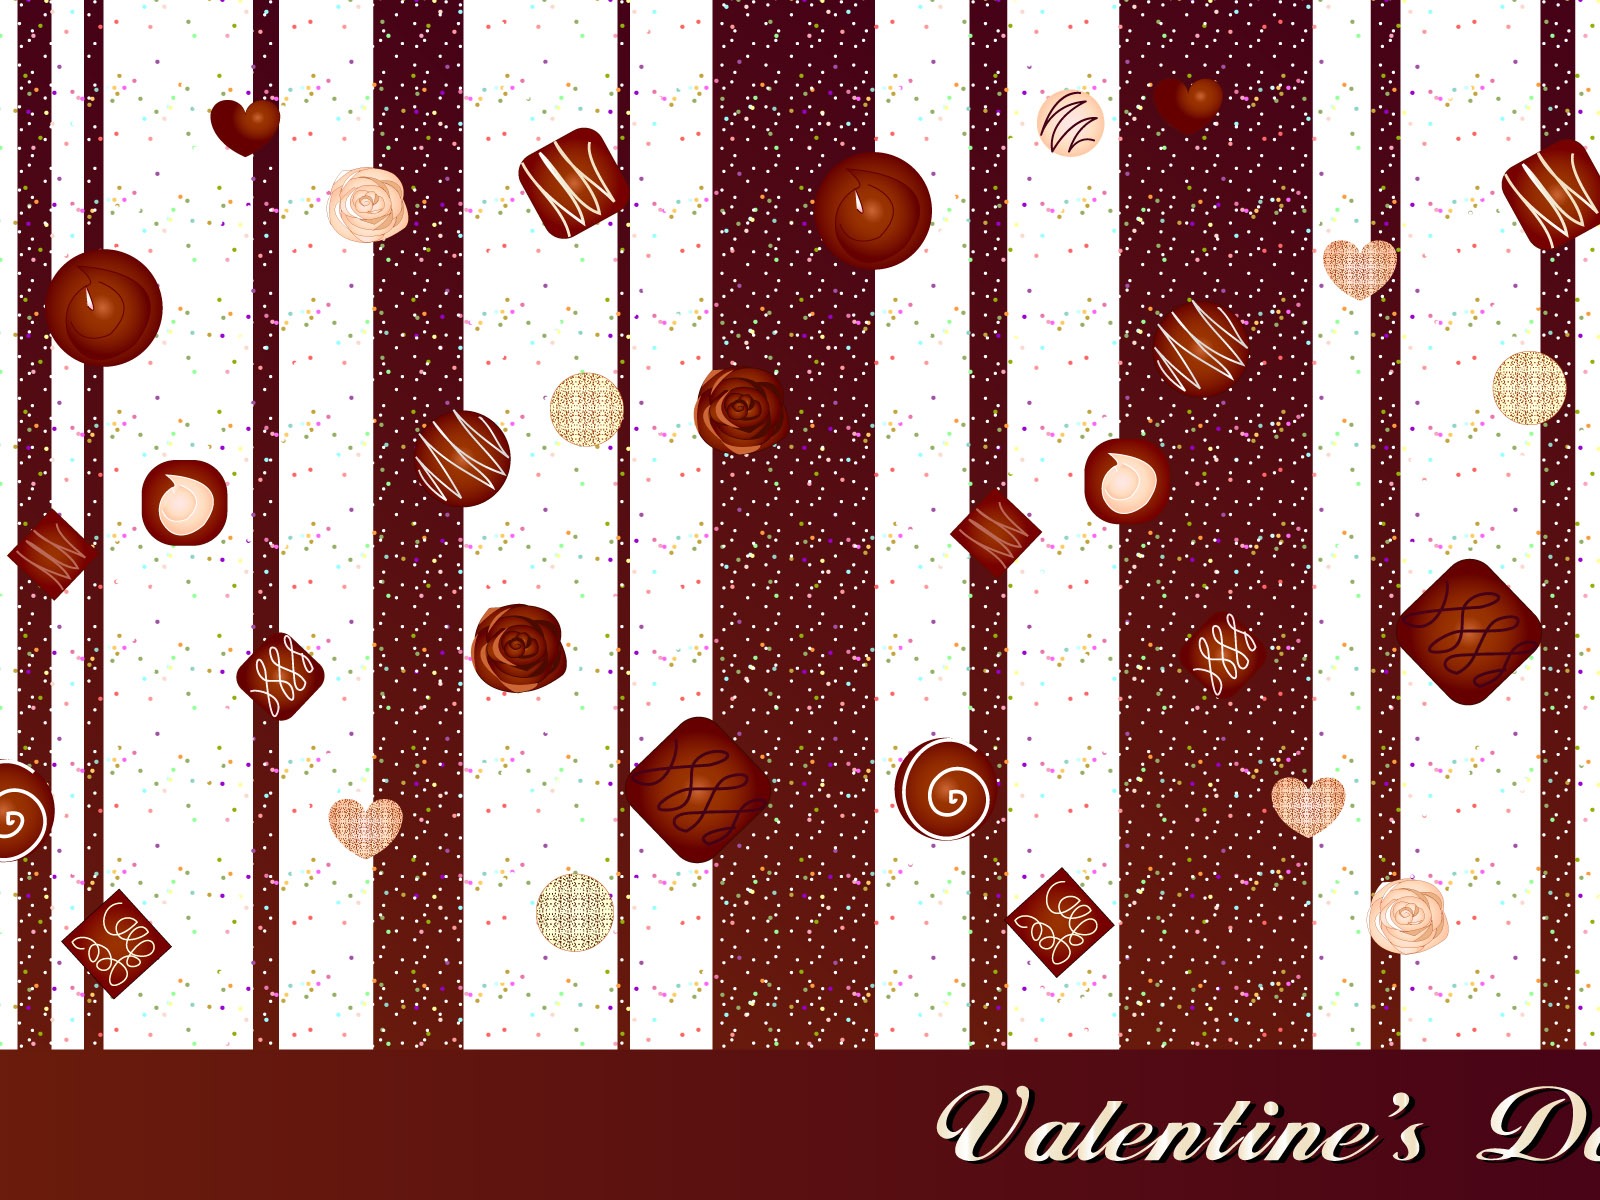 Valentine's Day Theme Wallpapers (1) #18 - 1600x1200